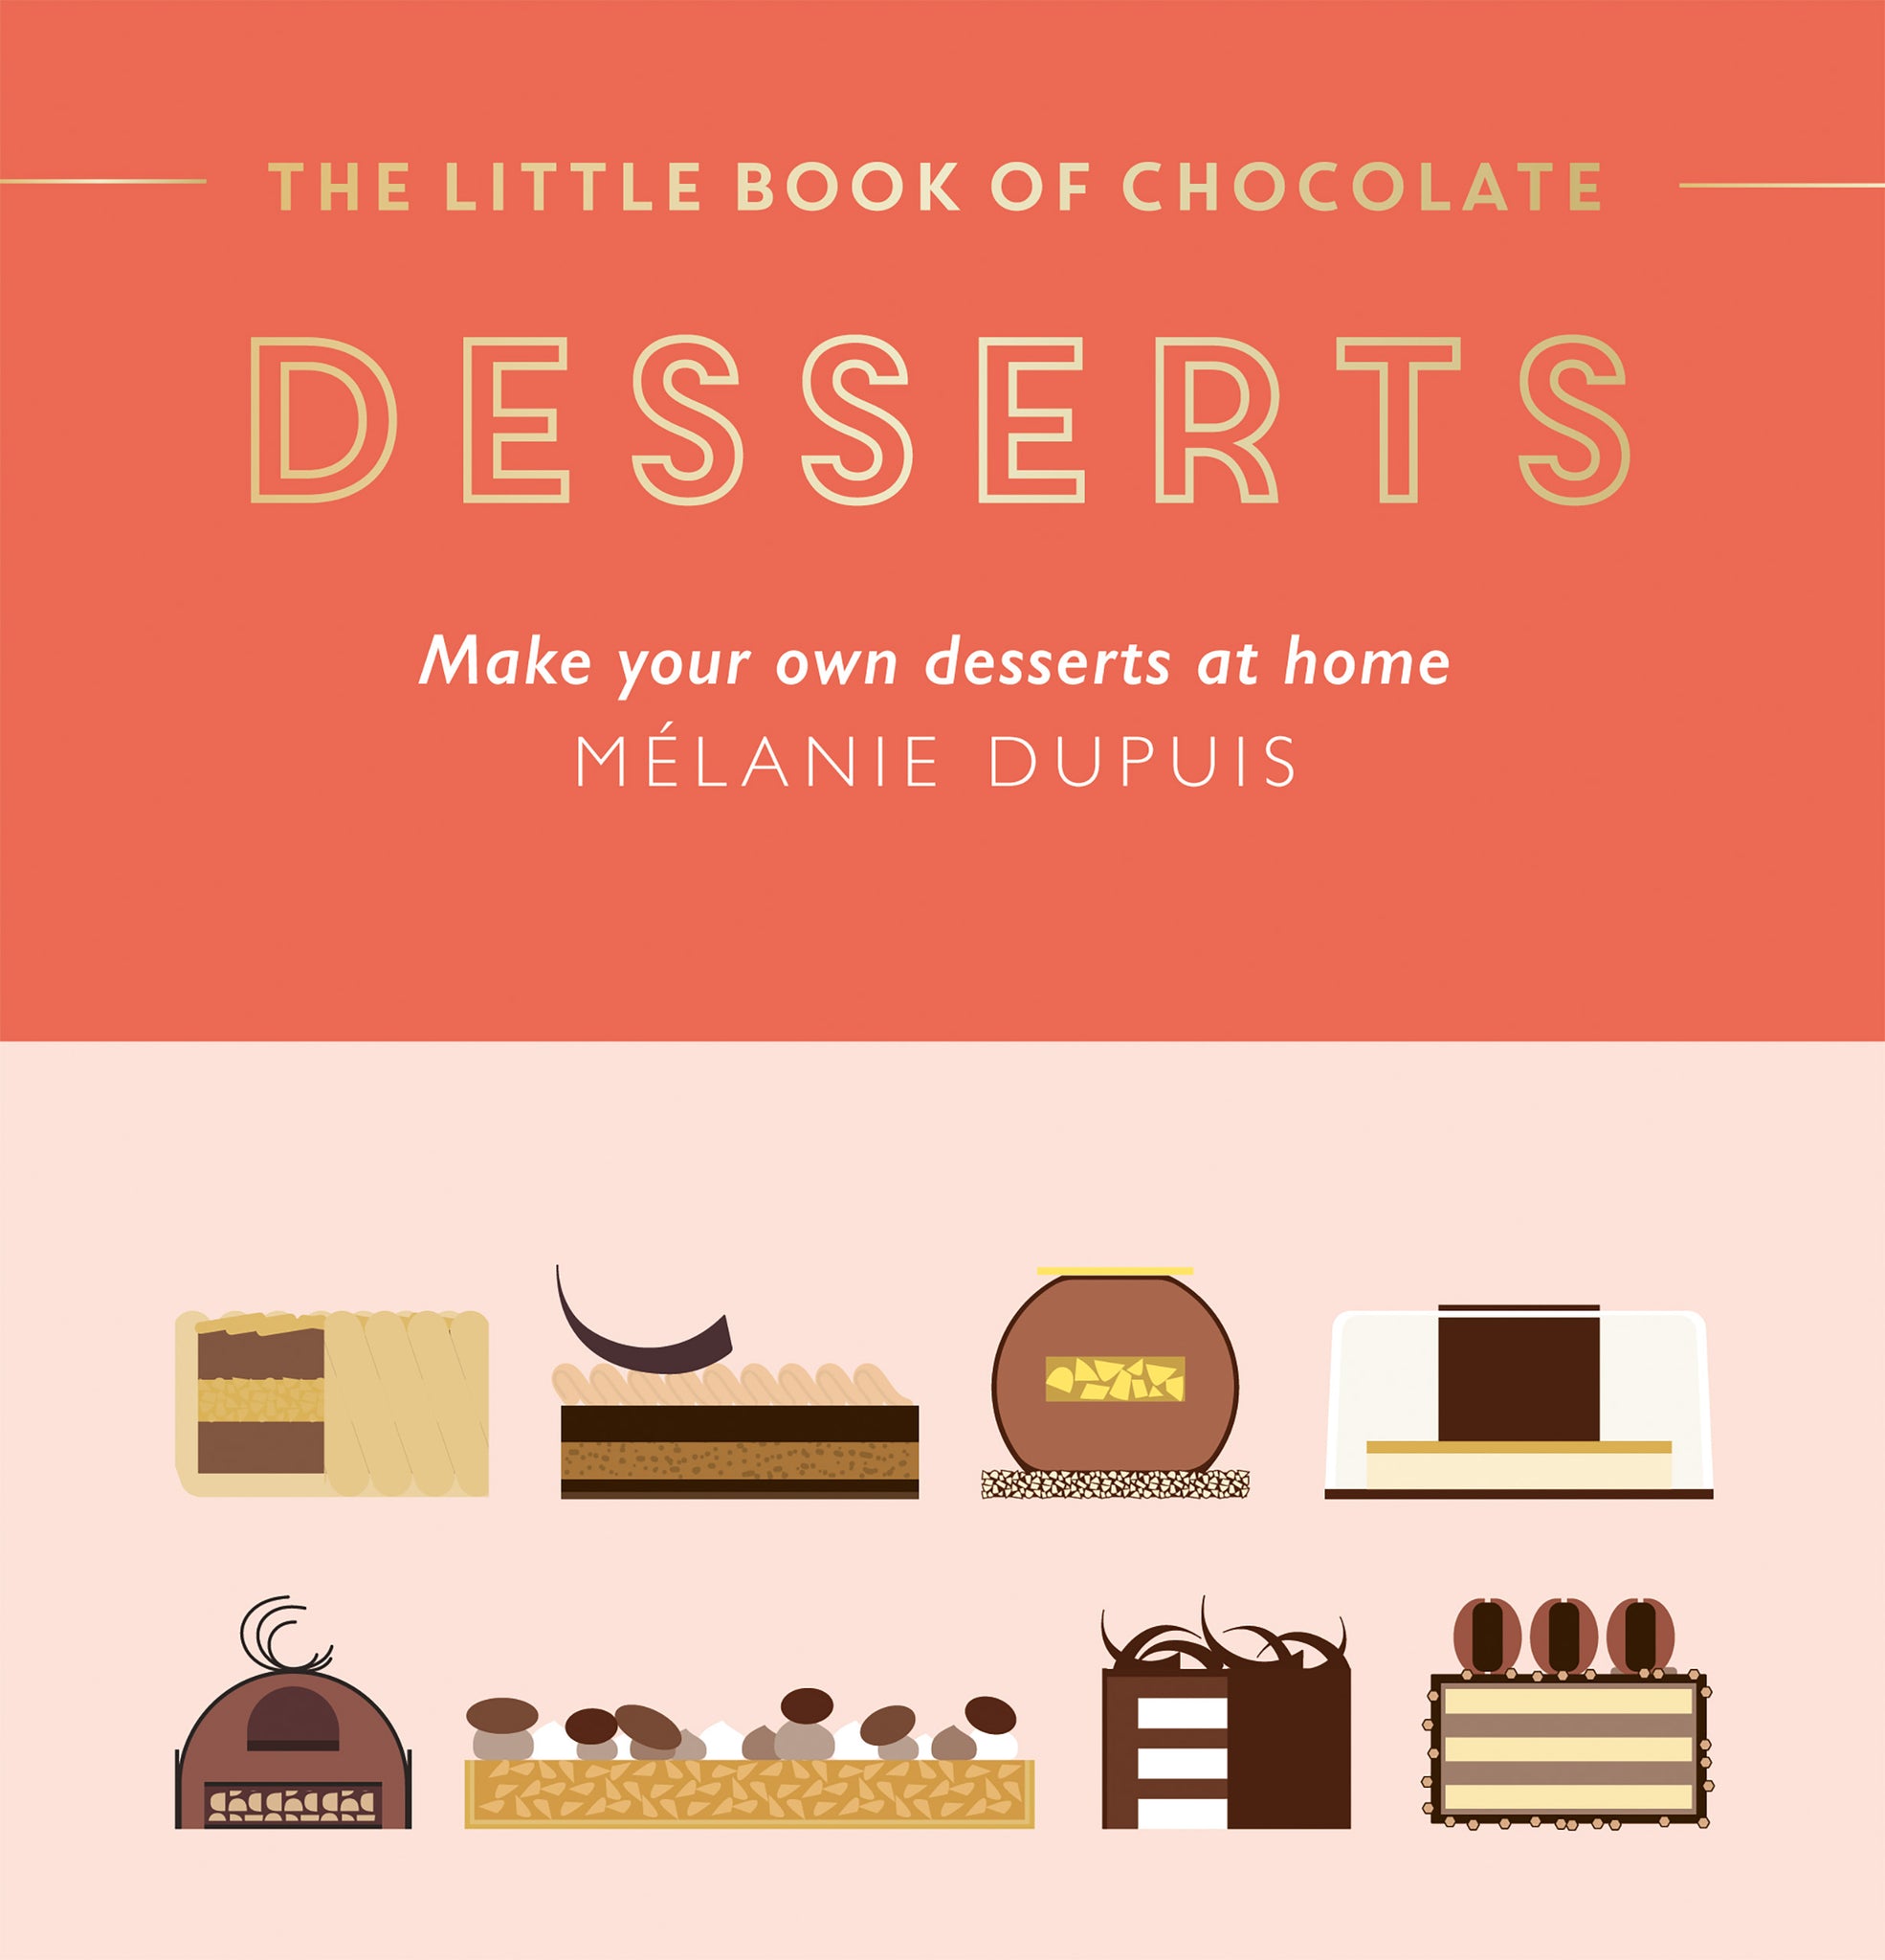 The Little Book of Chocolate: Desserts